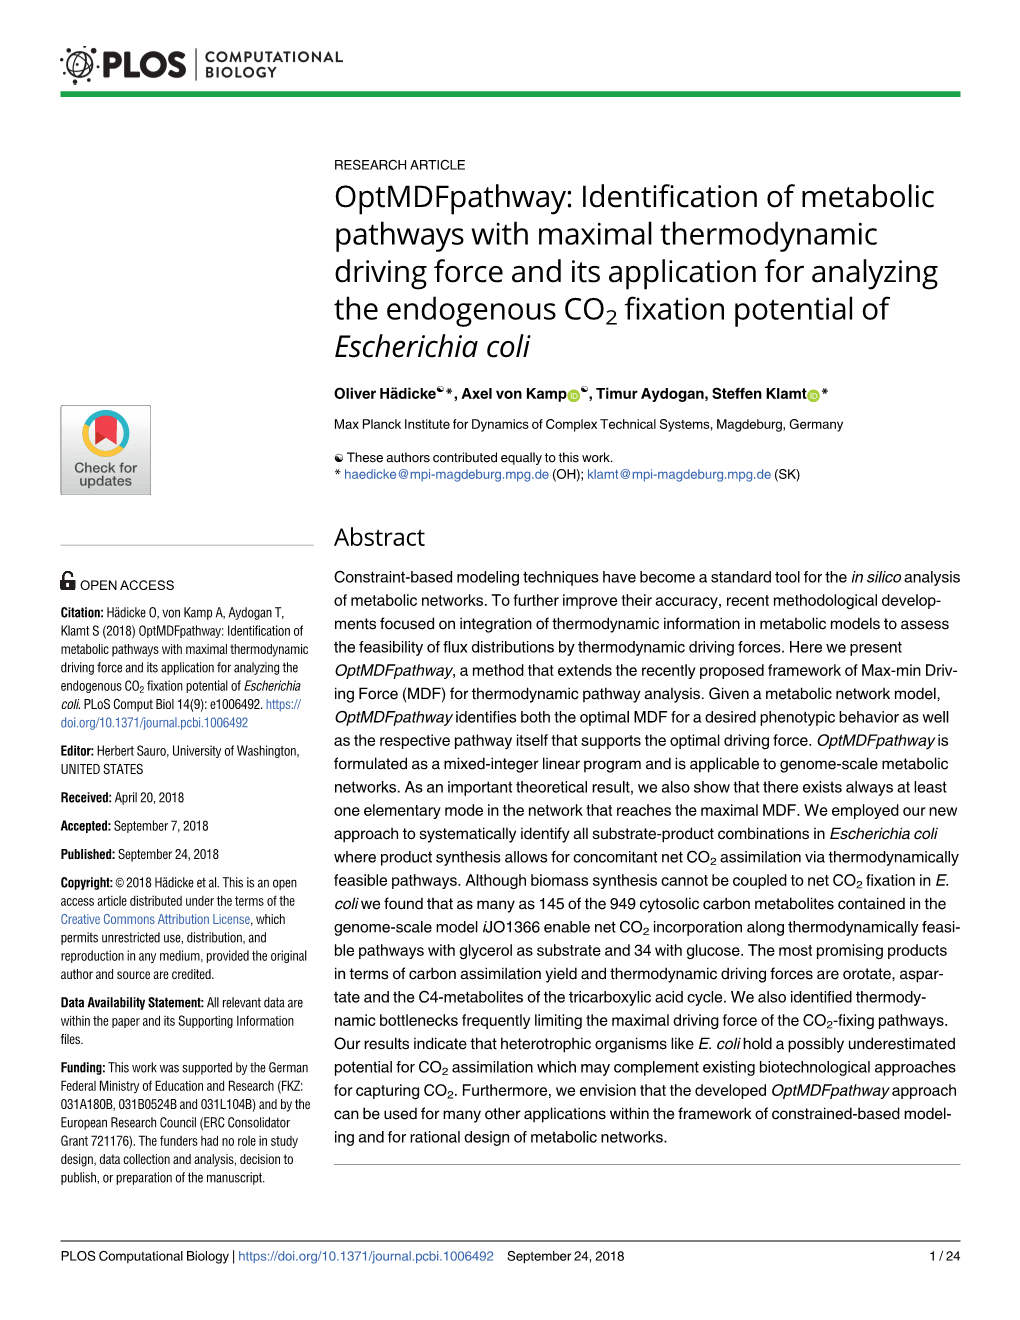 Optmdfpathway: Identification of Metabolic Pathways with Maximal Thermodynamic Driving Force and Its Application for Analyzing